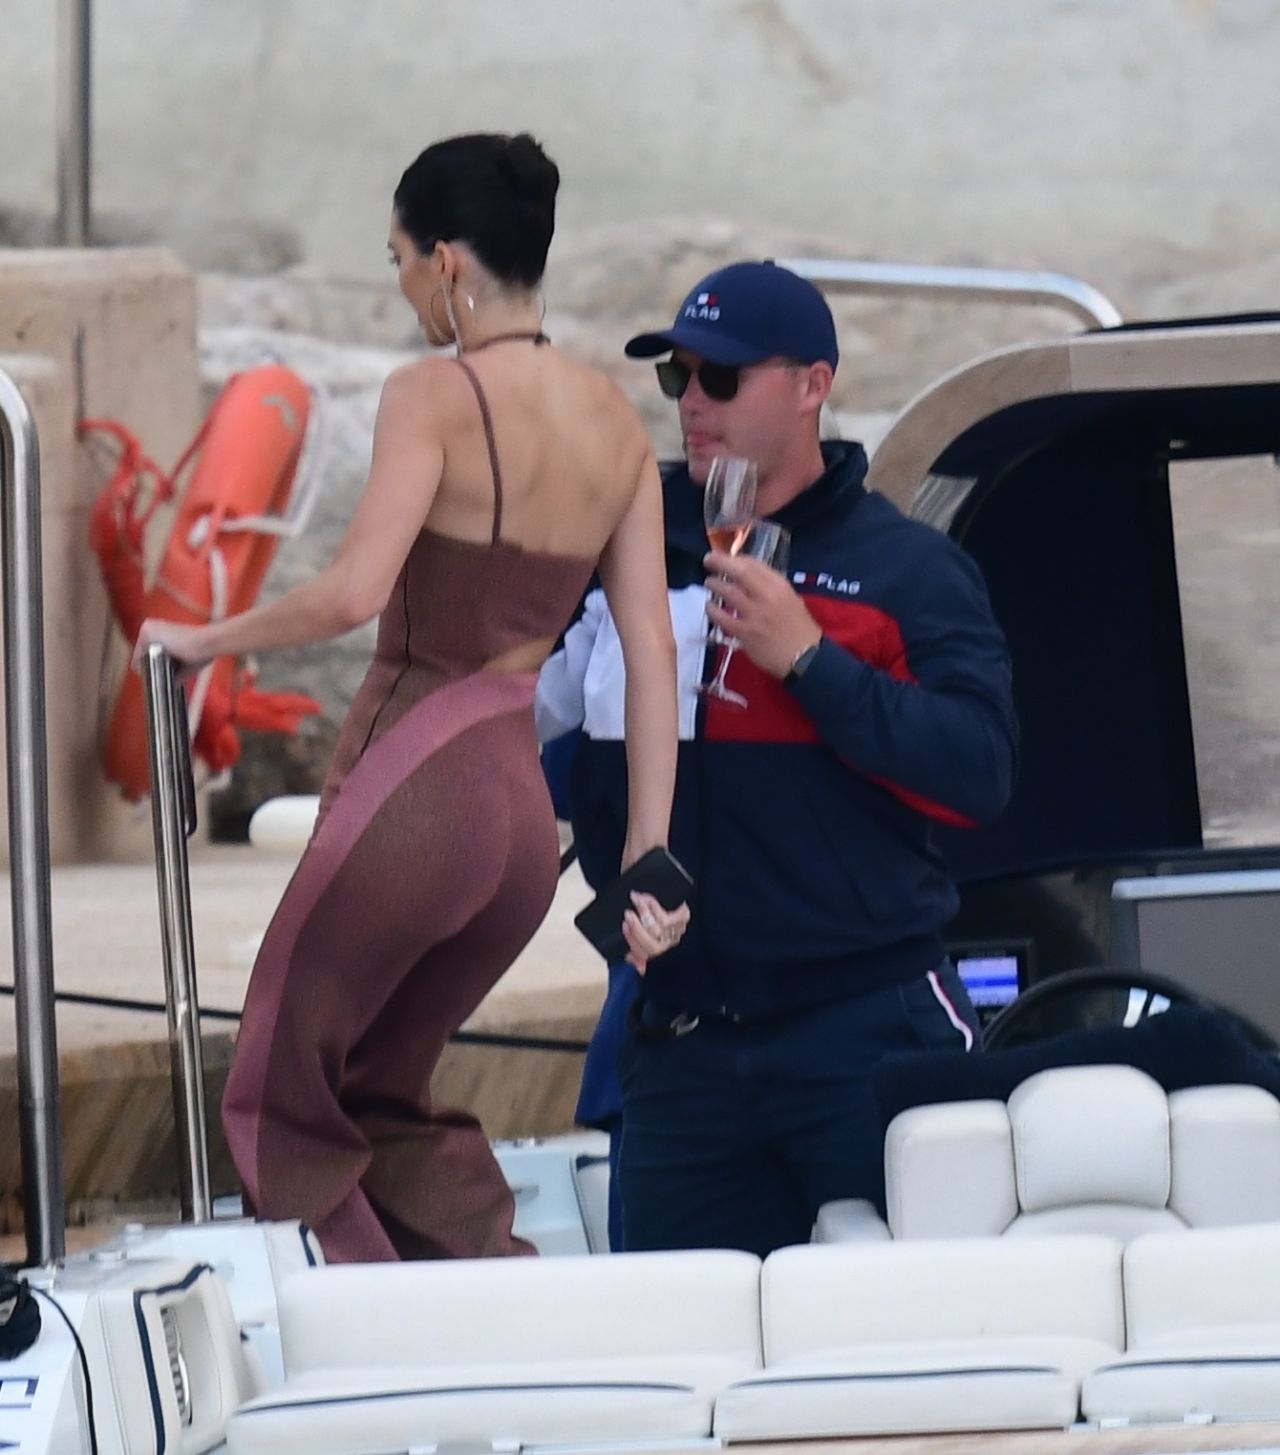 bella-hadid-and-kendall-jenner-tommy-hilfigers-yacht-in-monaco-05-25-2019-20.jpg